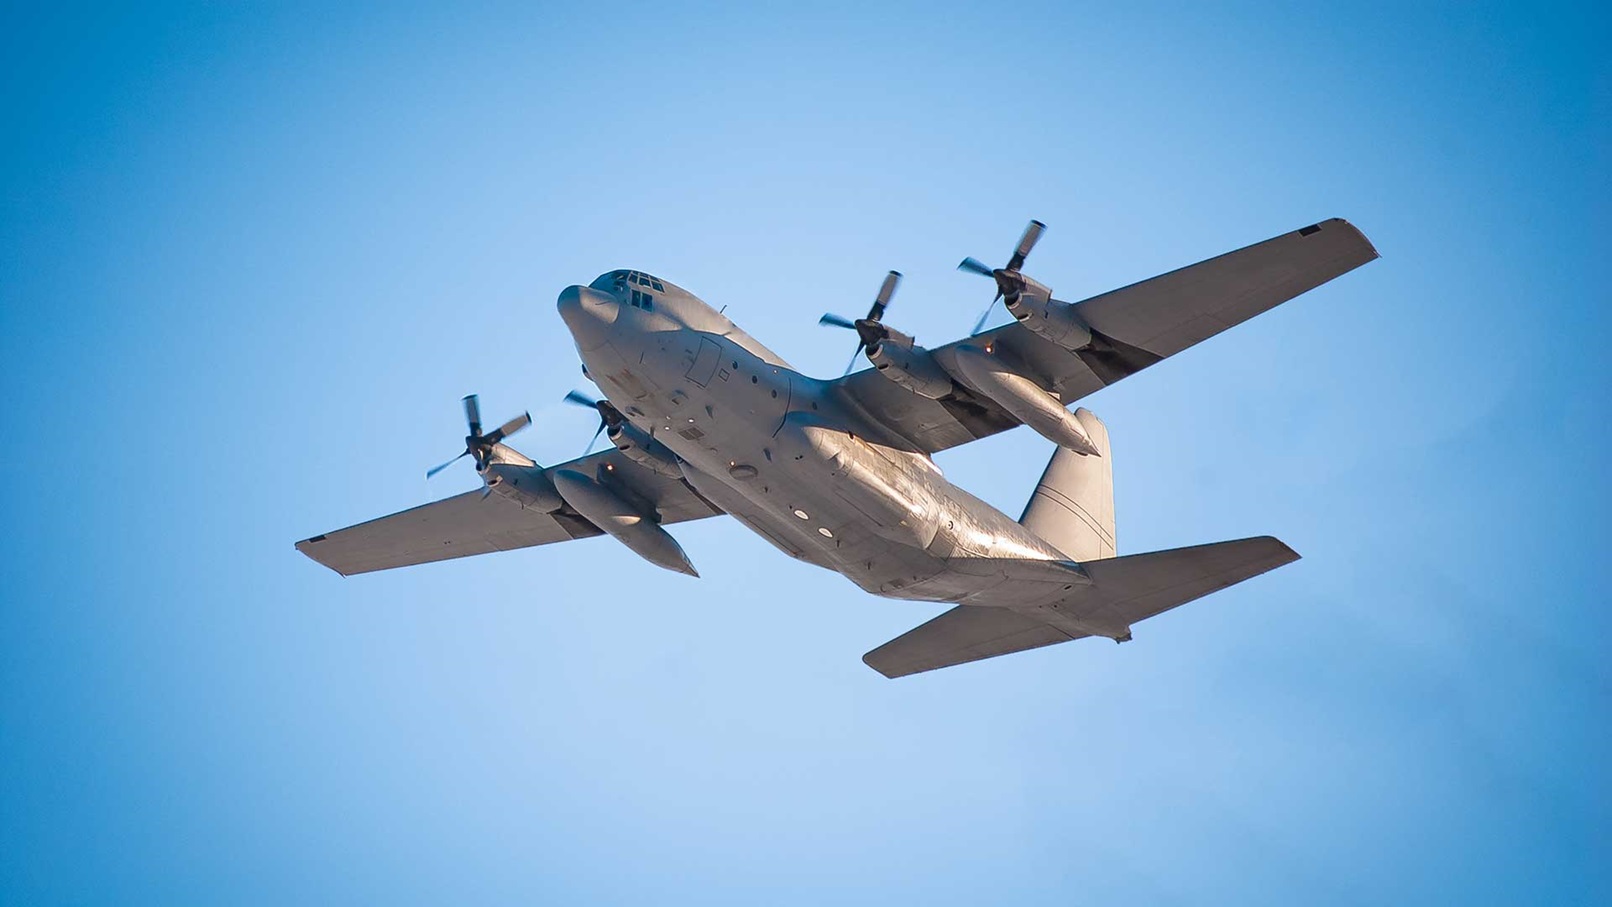 Indonesian Air Force Selects Collins Aerospace for Its C-130H Hercules Aircraft Modernization